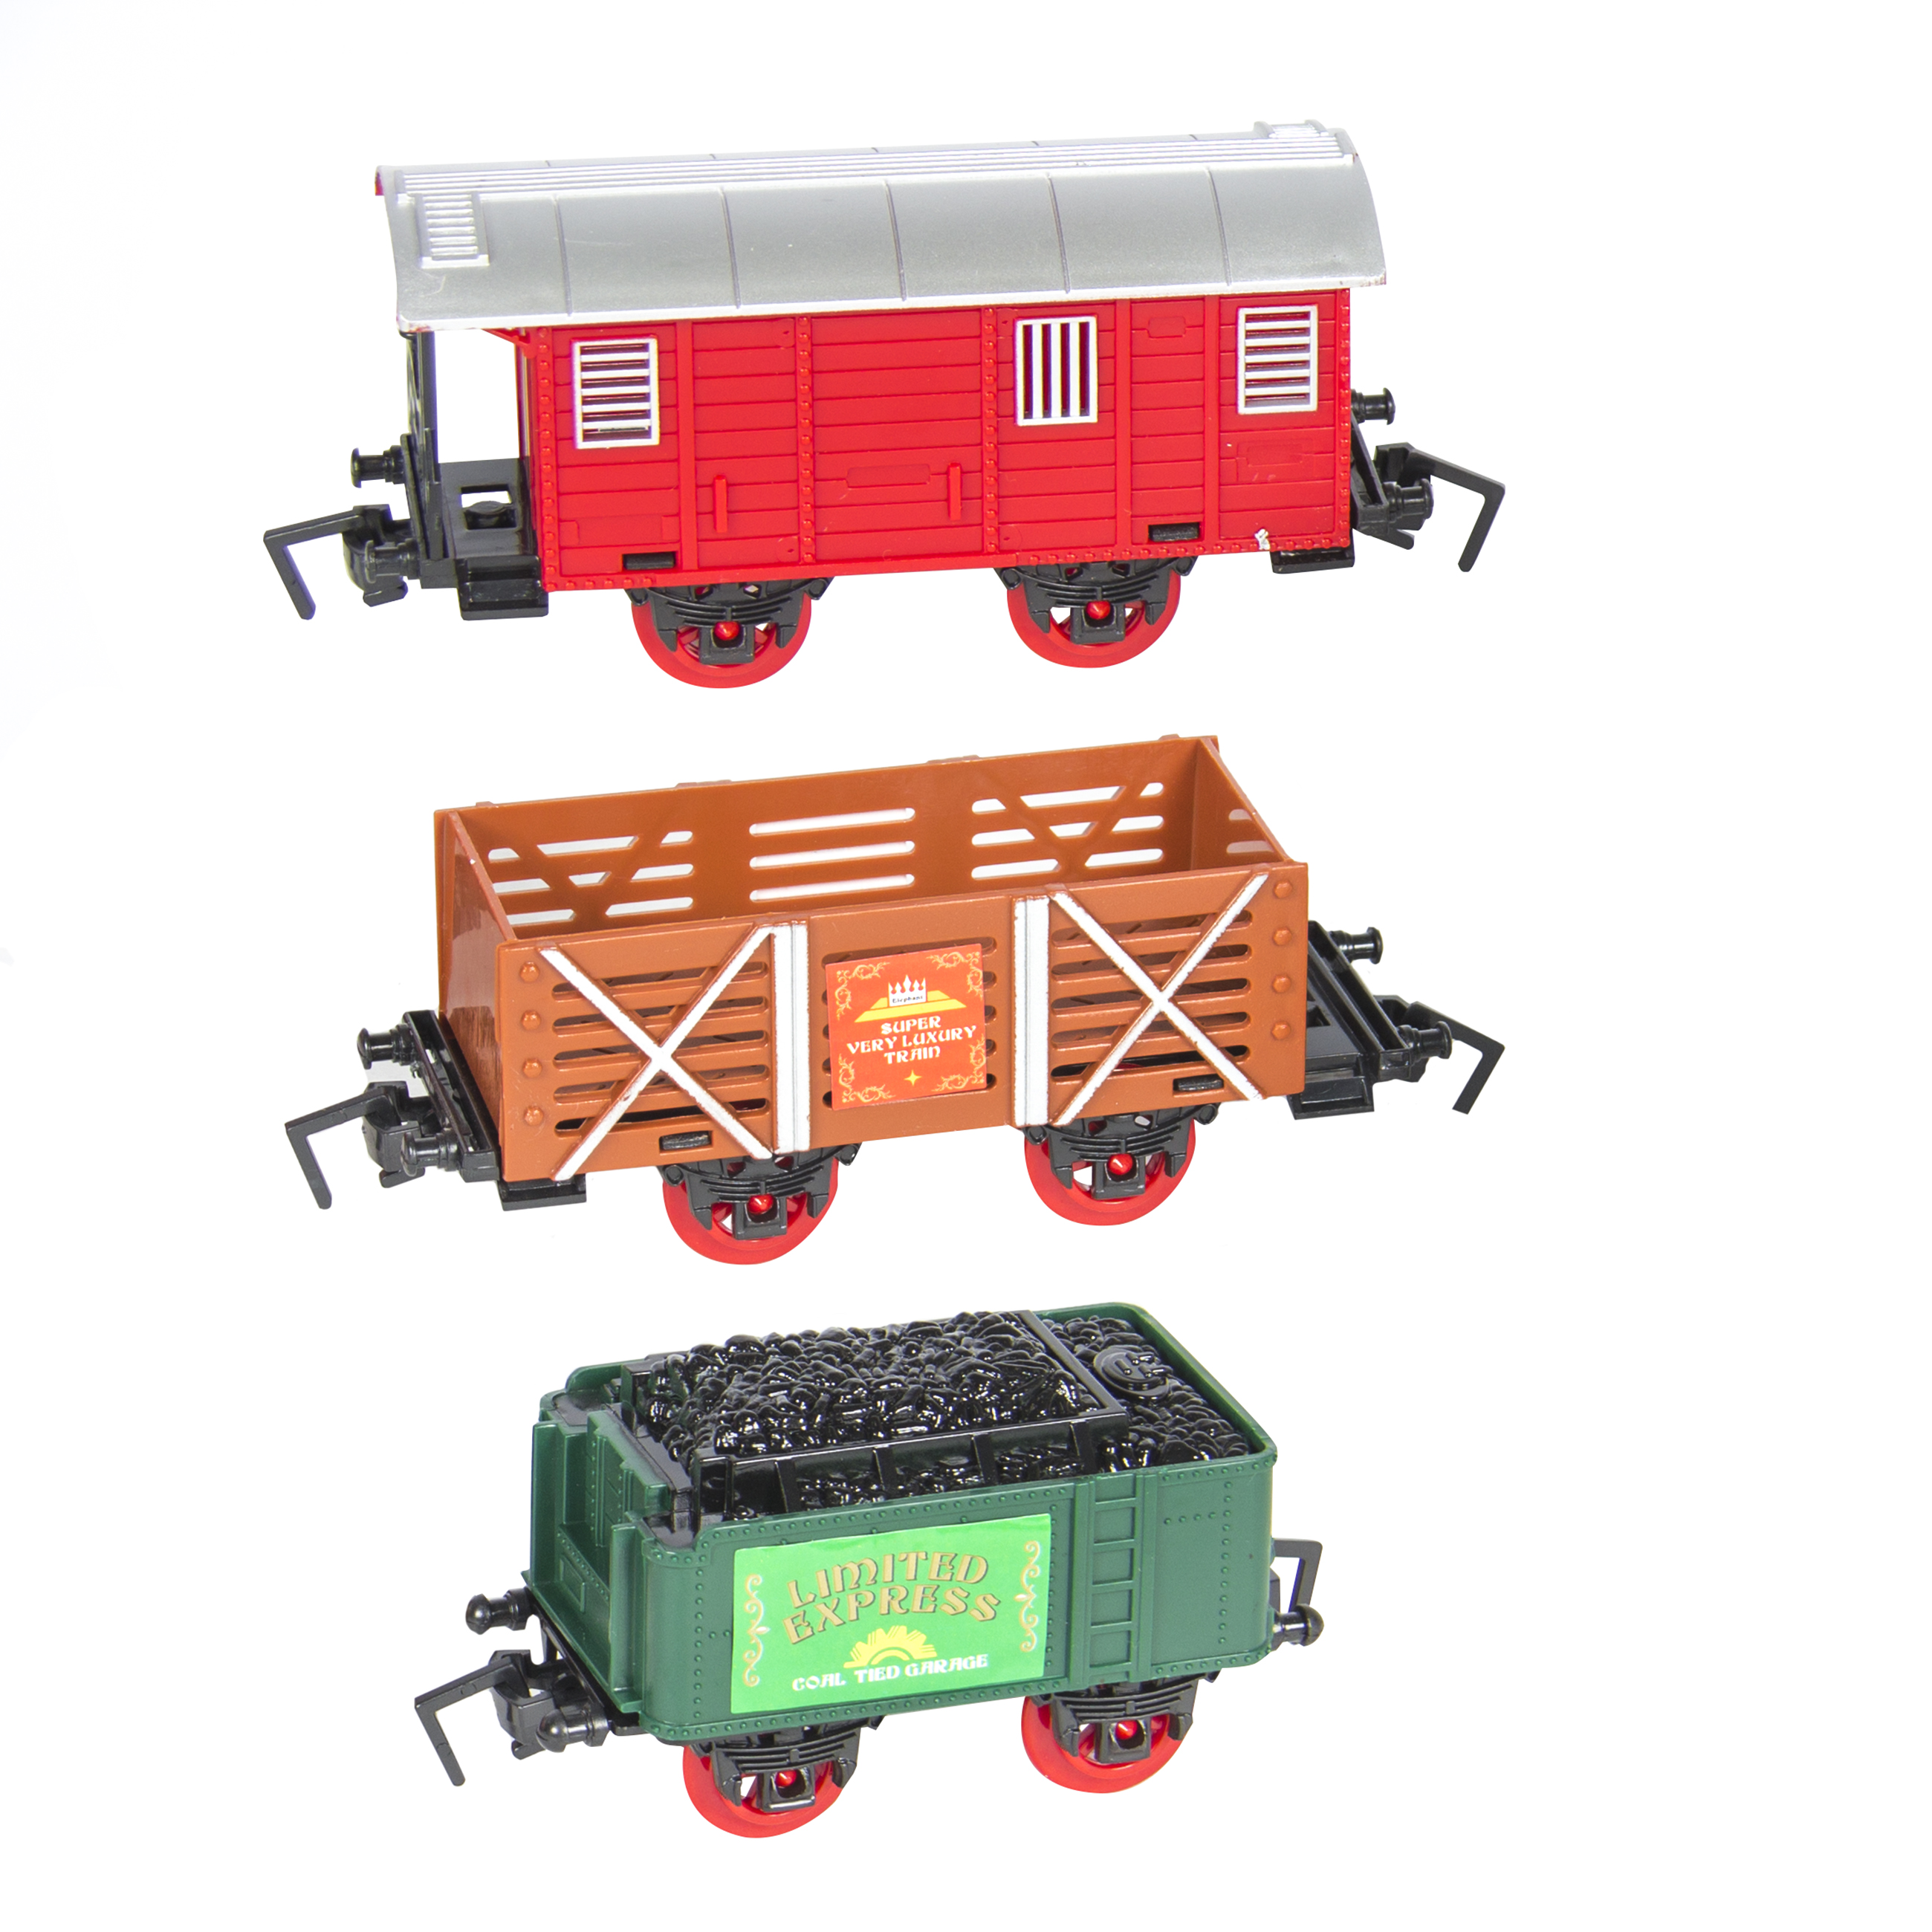 Best Choice Products Kids Classic Electric Railway Train Car Track Play Set Toy w/ Music, Lights - image 4 of 5